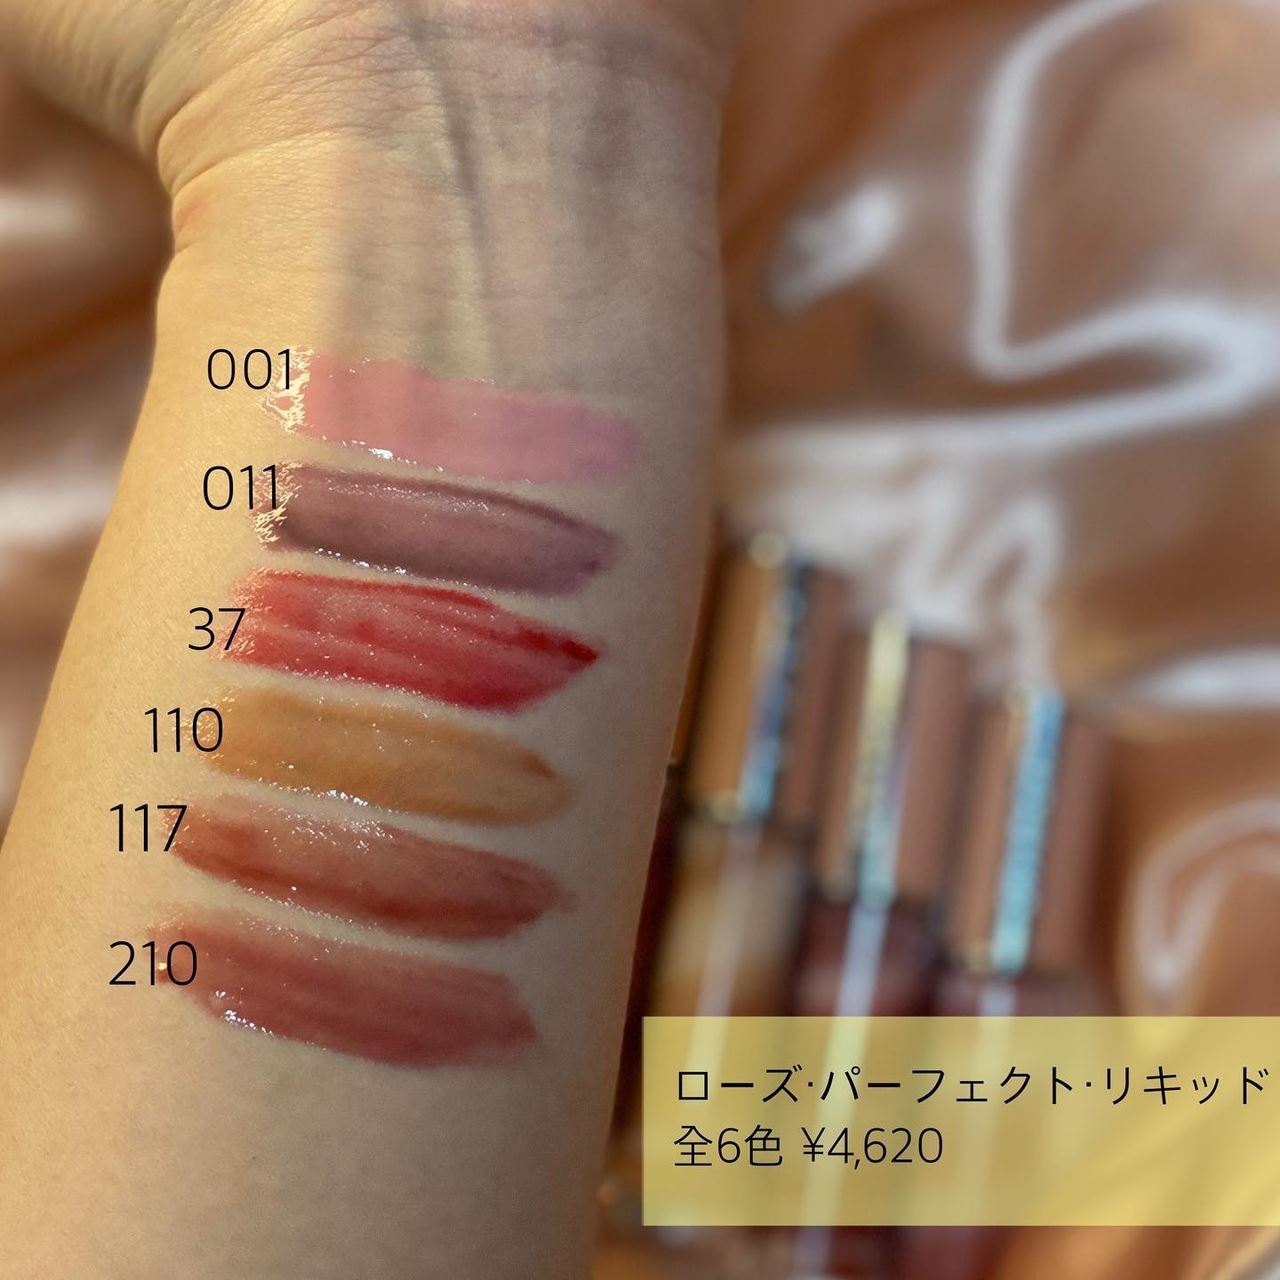 Givenchy Rose Perfecto Liquid Marble Balm 2022 - Swatches